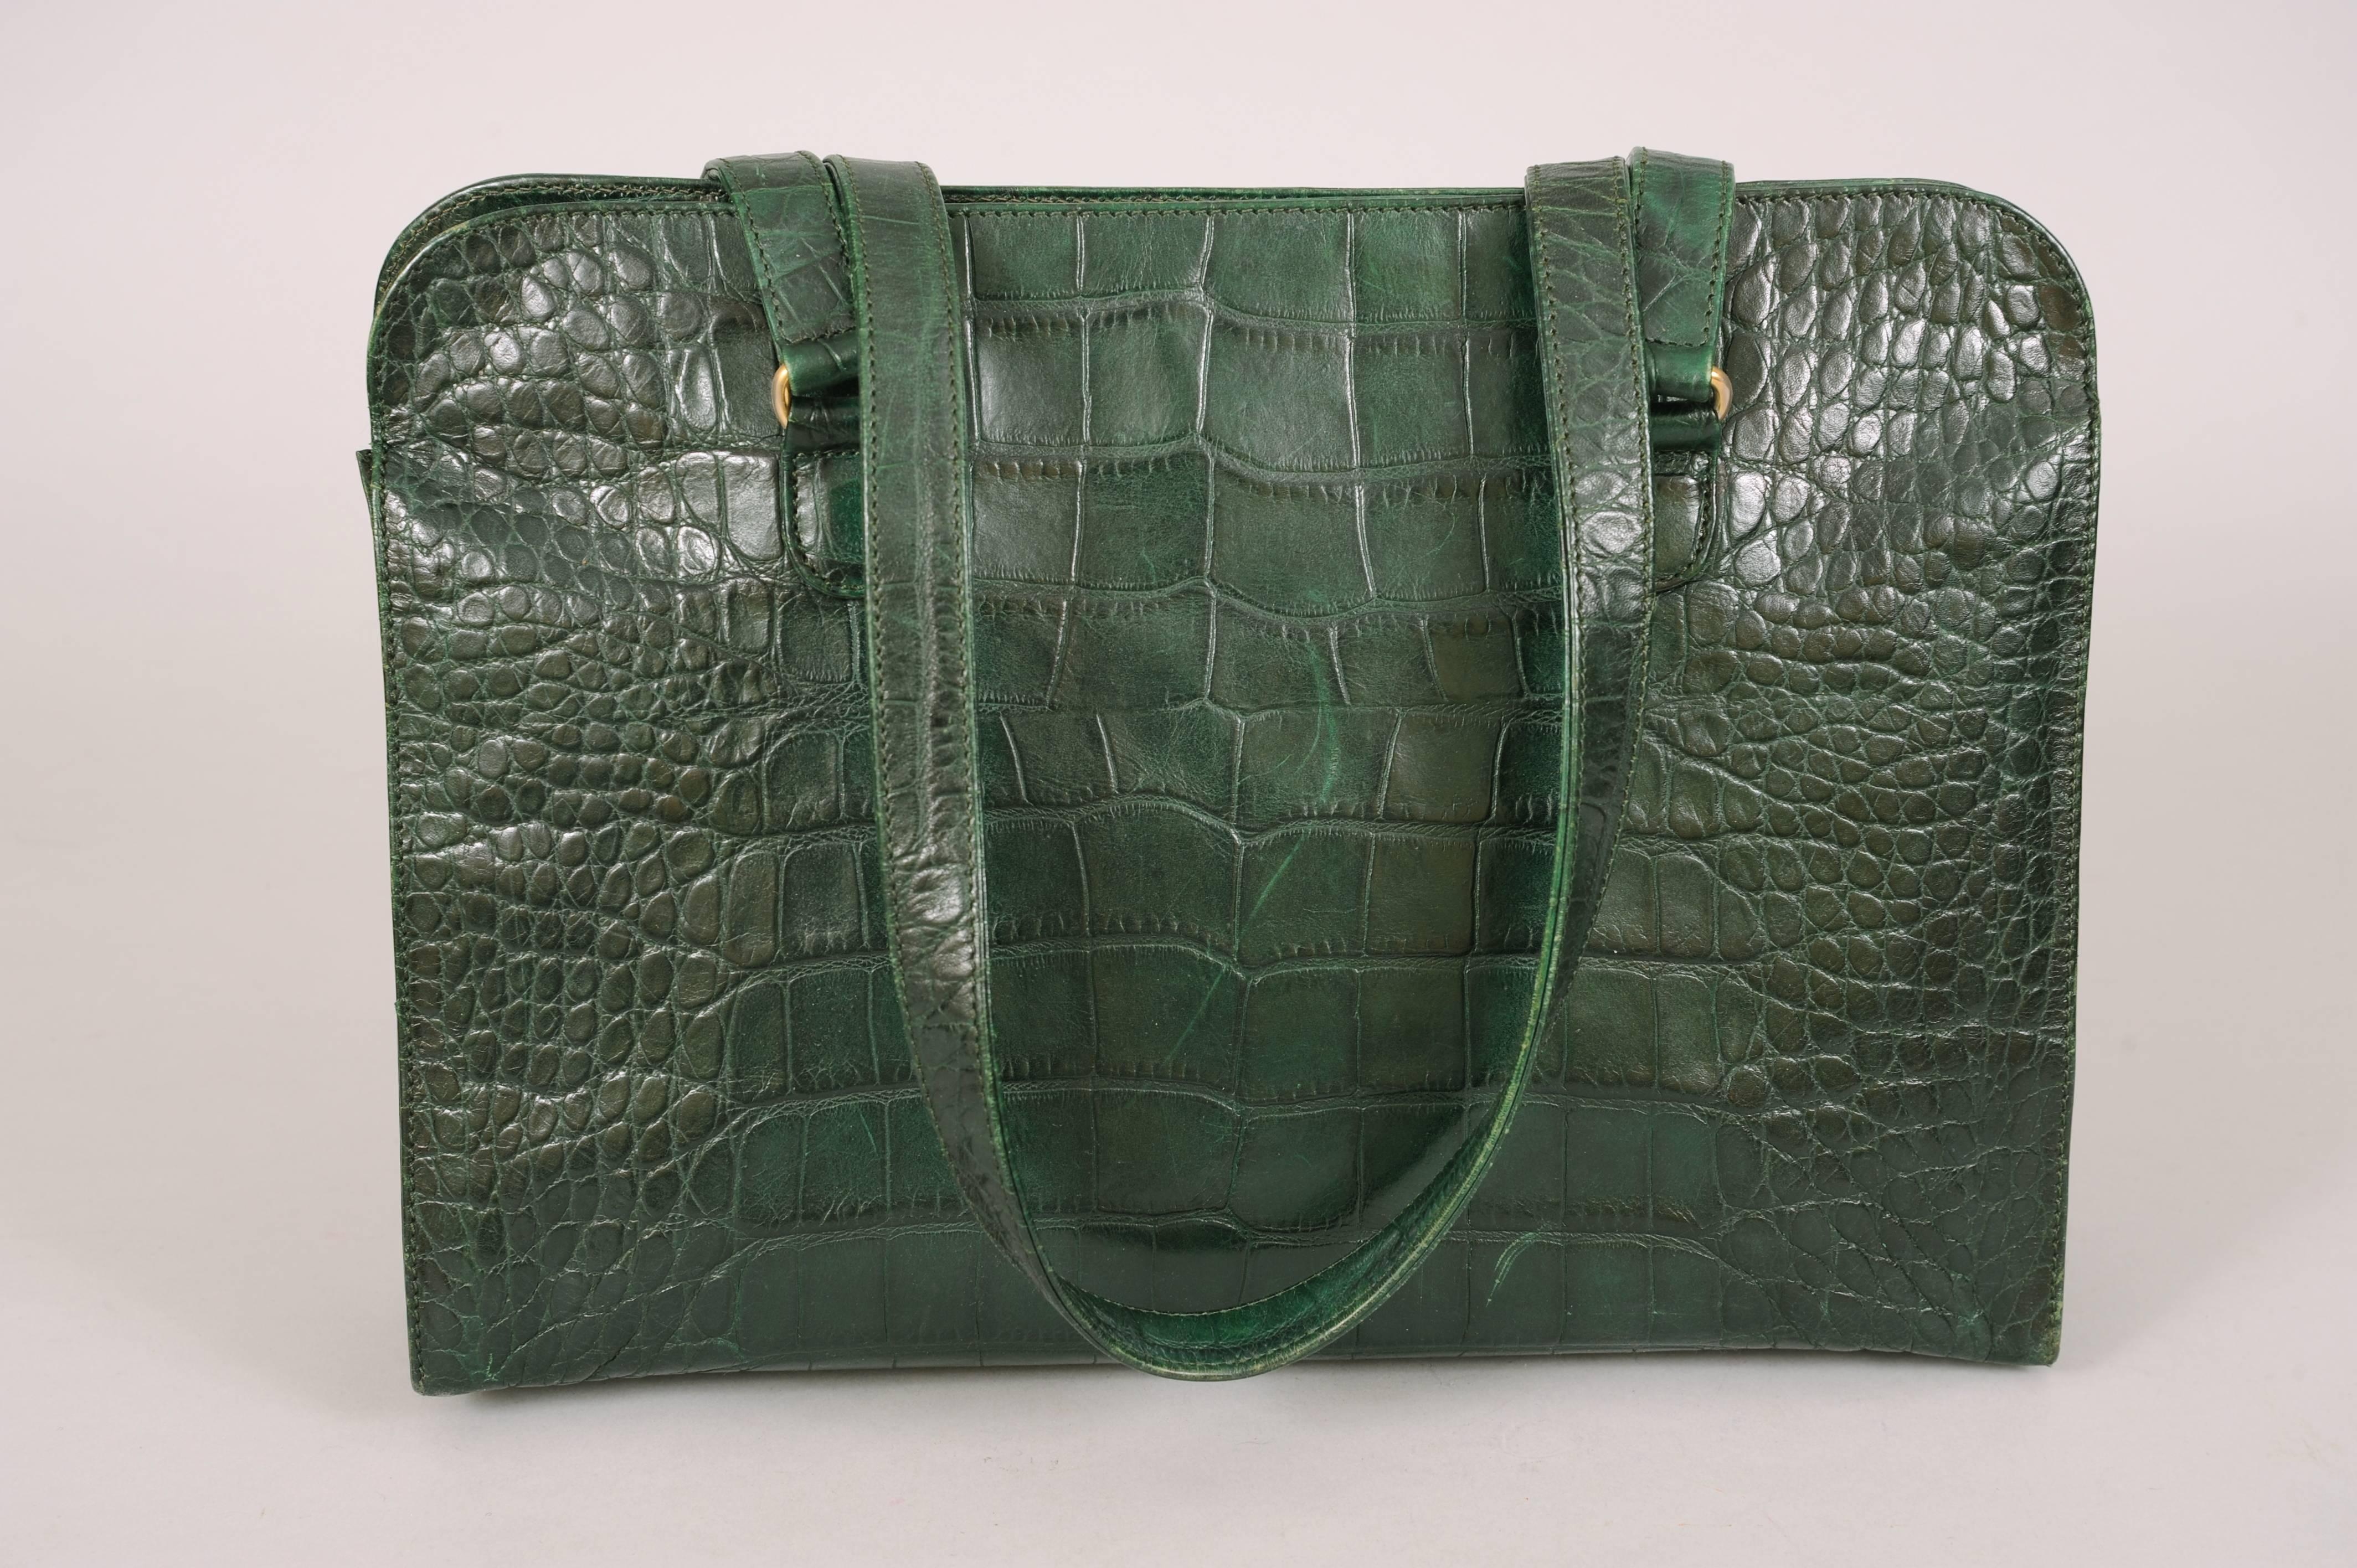 A beautiful deep green leather is patterned to resemble alligator skin for this zip top shoulder bag designed by Sonia Rykiel. Lined in pristine black logo fabric the bag has an interior zipper pocket. The straps can be worn on the shoulder or used